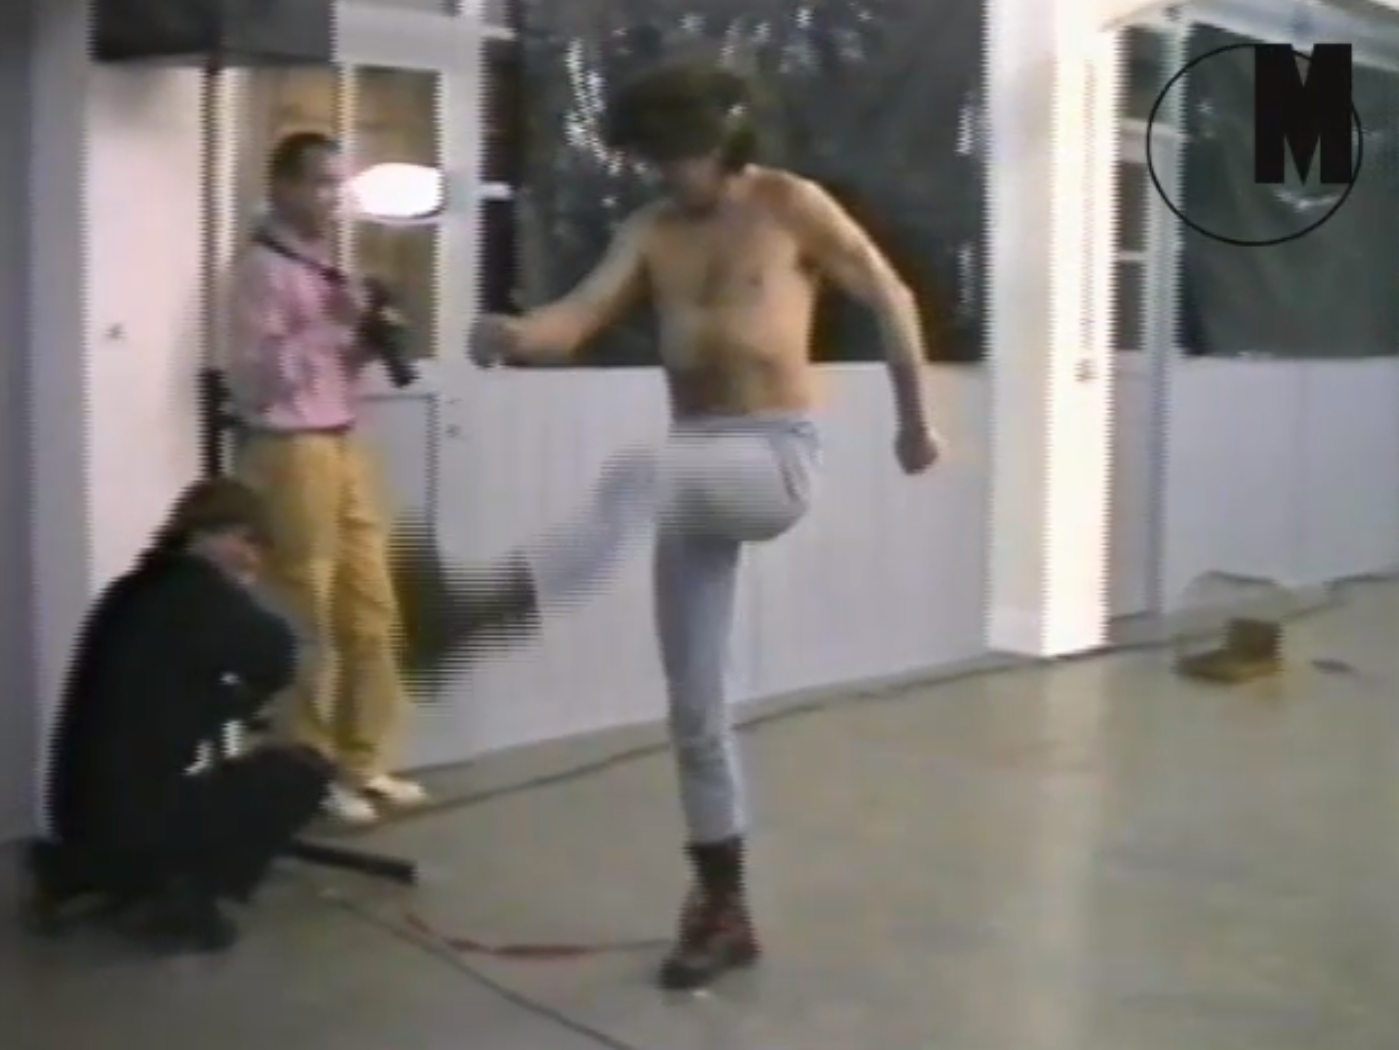 Zbigniew Warpechowski, 'Marsz' [March], stillframe from a video registration of a performance, Stuttgart 1984, courtesy of Artists' Archives of The Museum of Modern Art in Warsaw